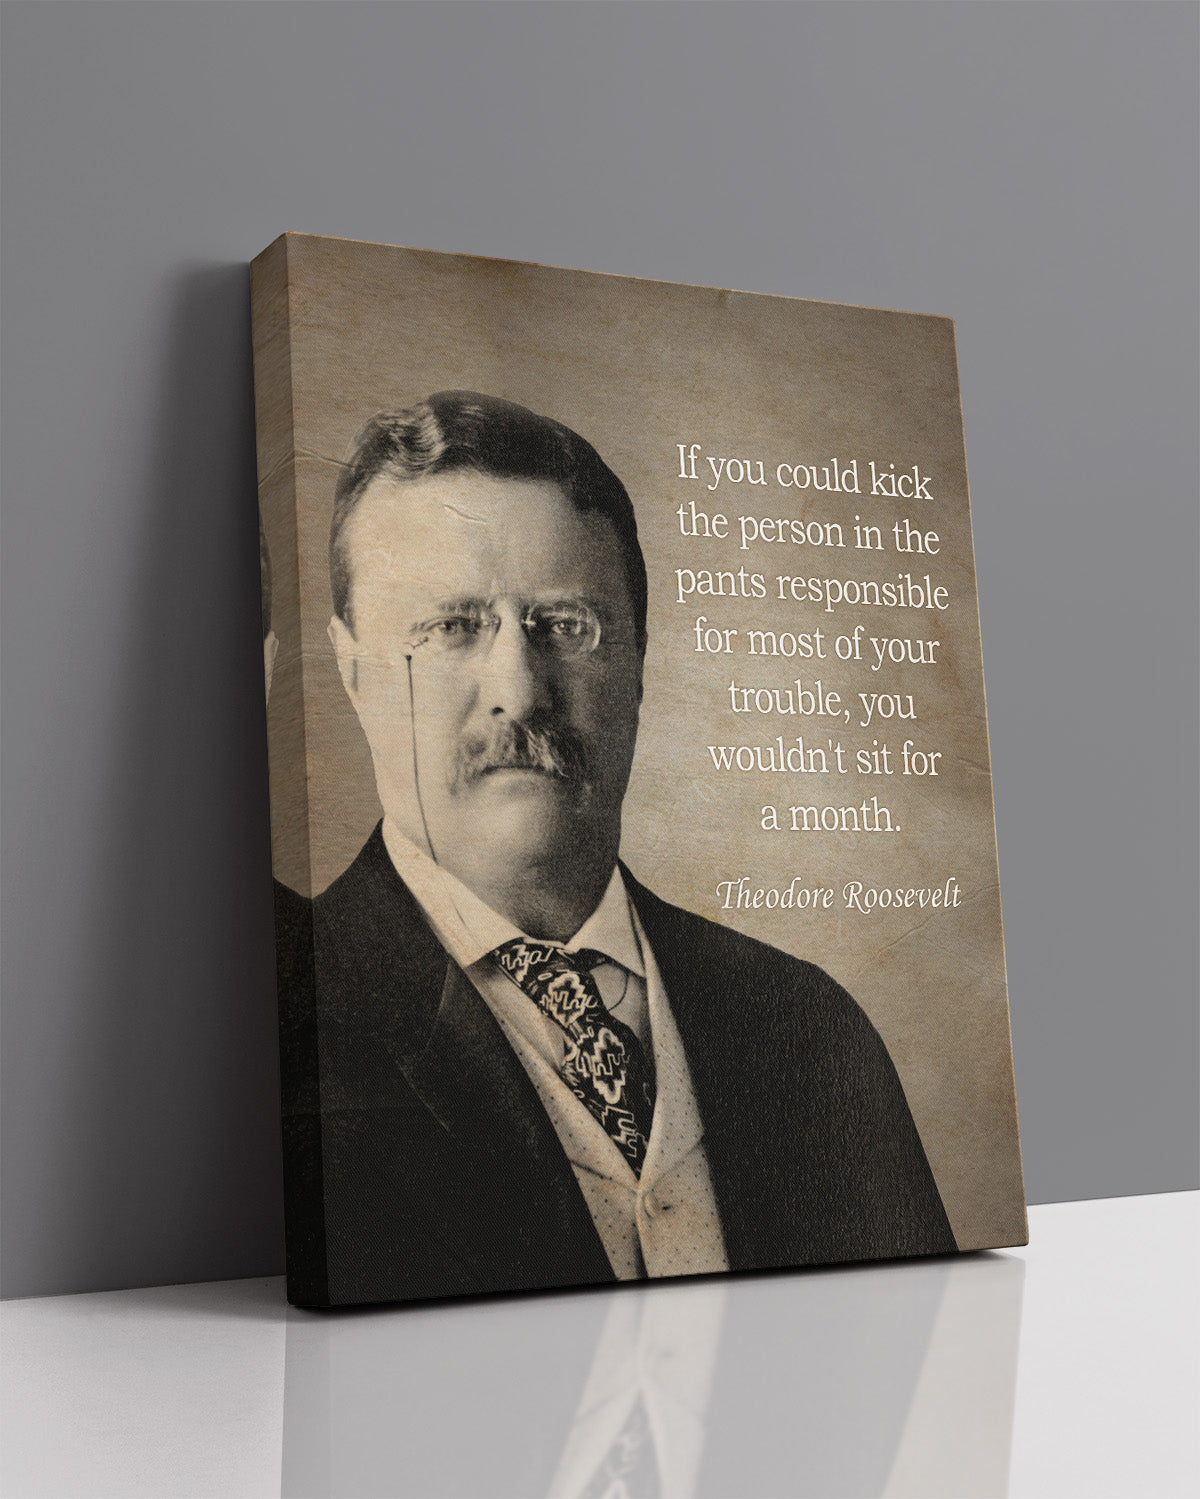 Theodore Roosevelt Historic Quote - If you could kick the person - Great Inspirational Gift - Motivational Print - American Patriotic President